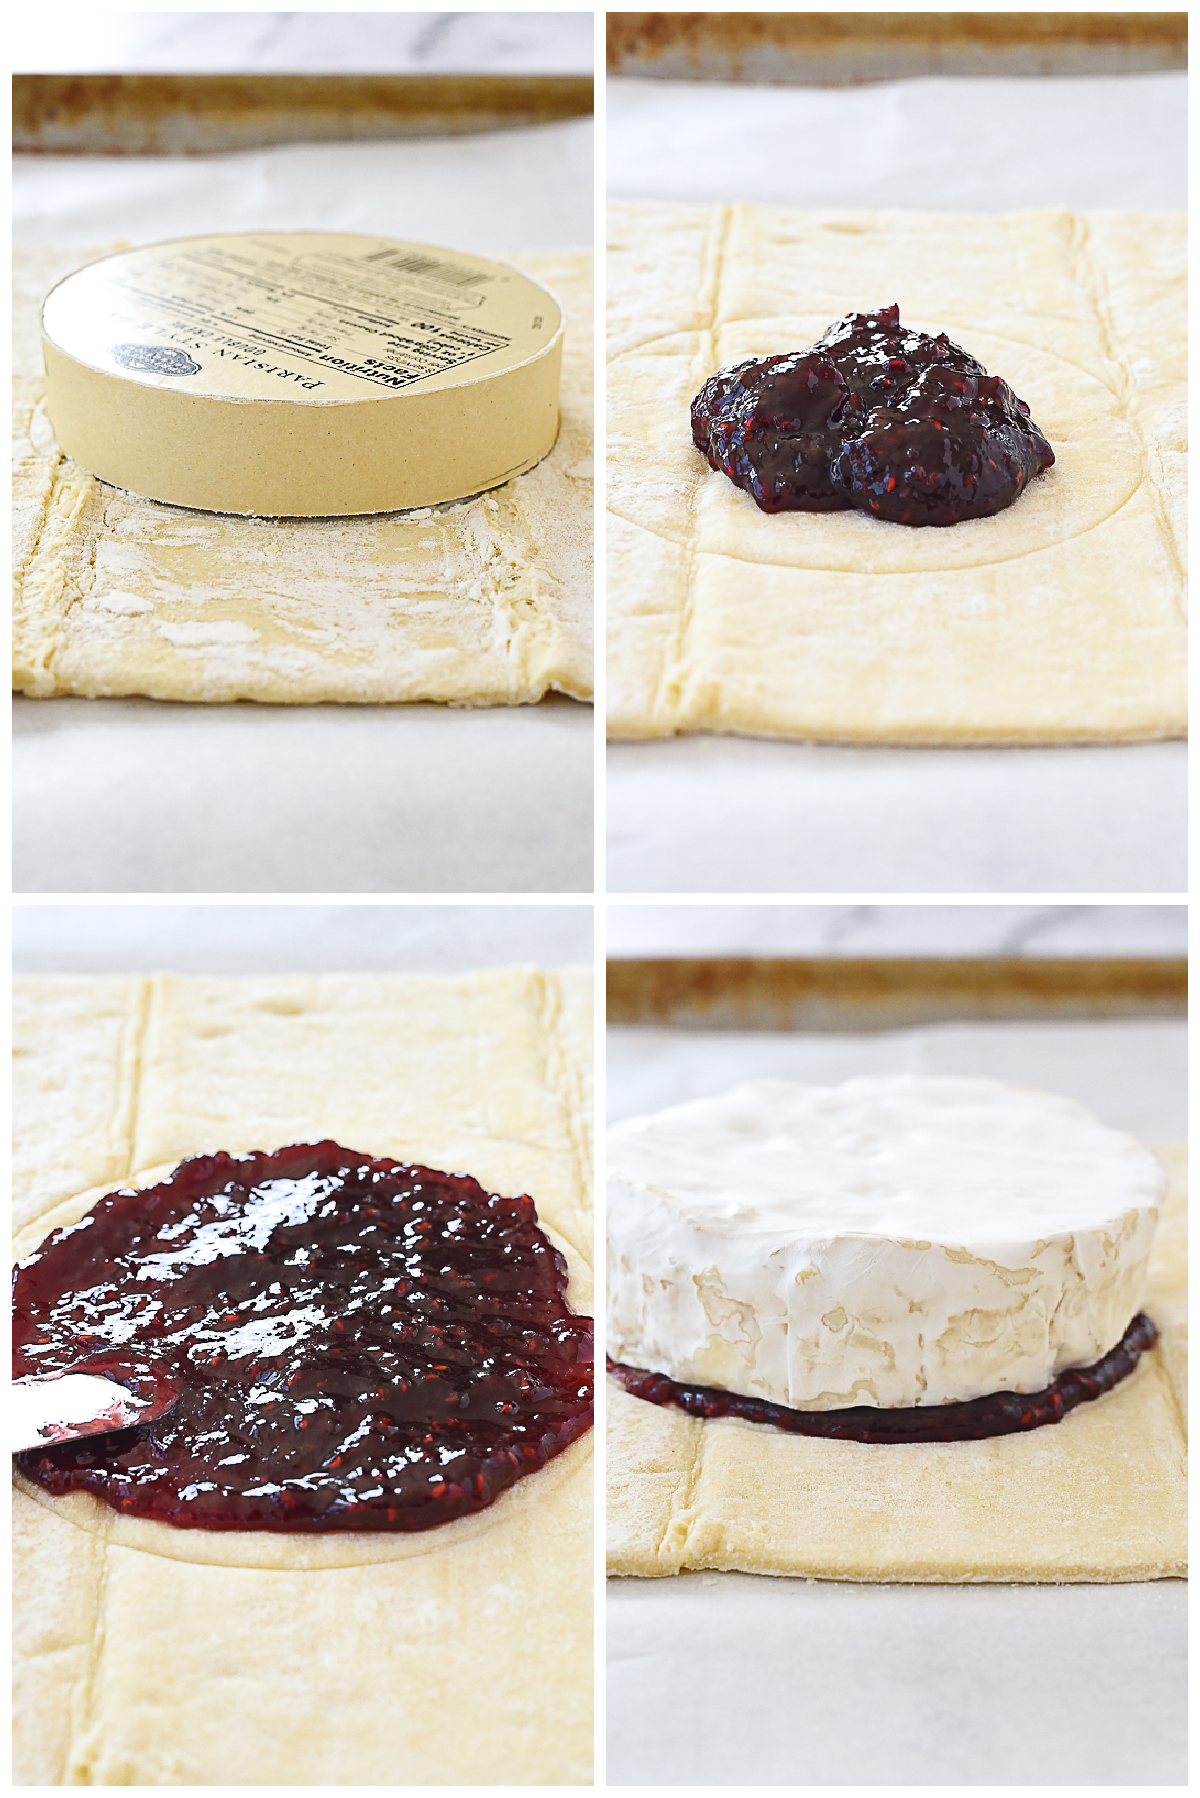 wrapping brie in puff pastry.